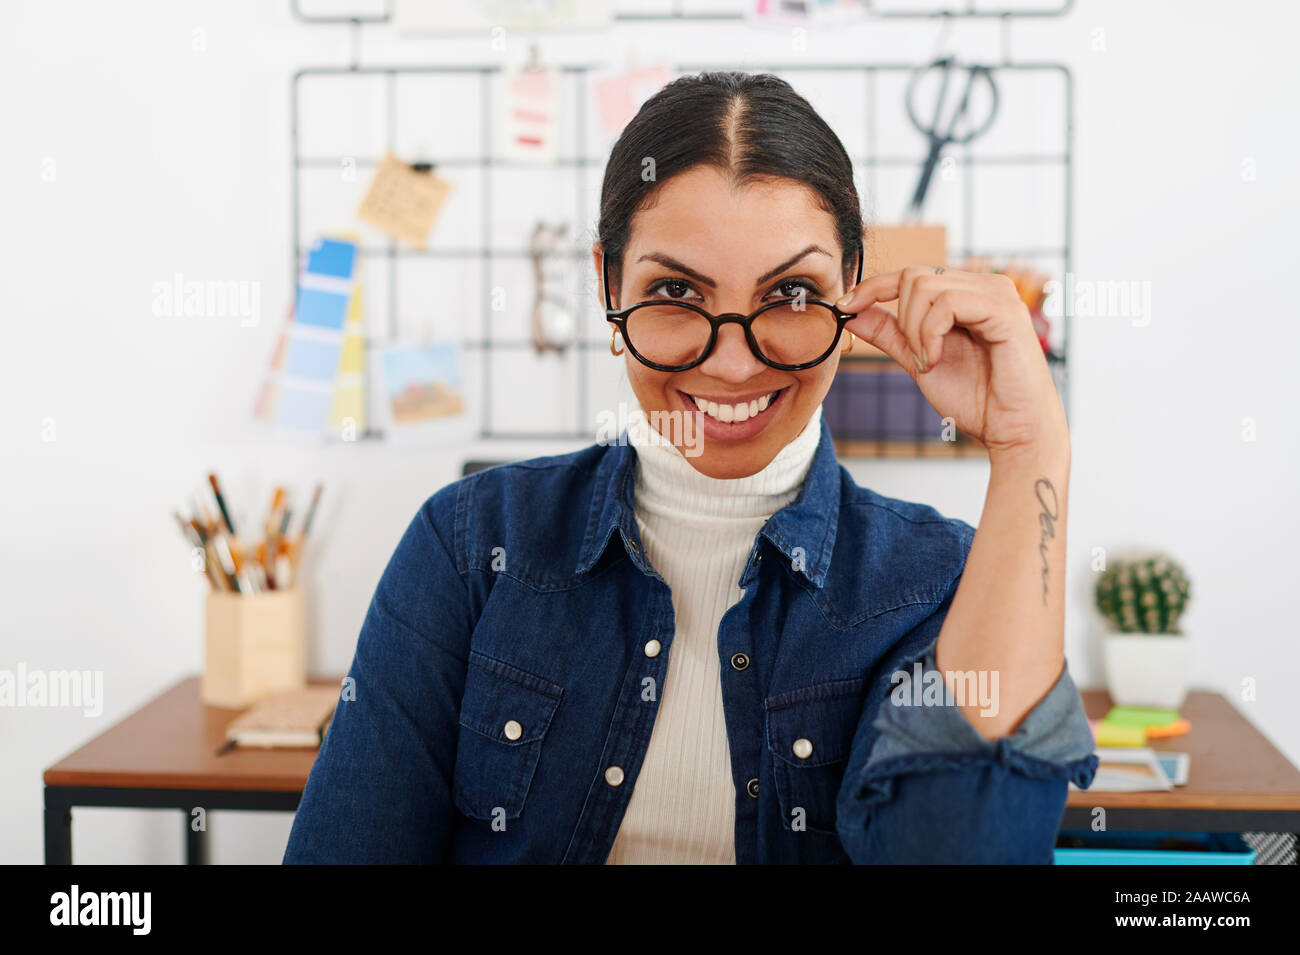 Young smiling woman with hand on glasses Stock Photo